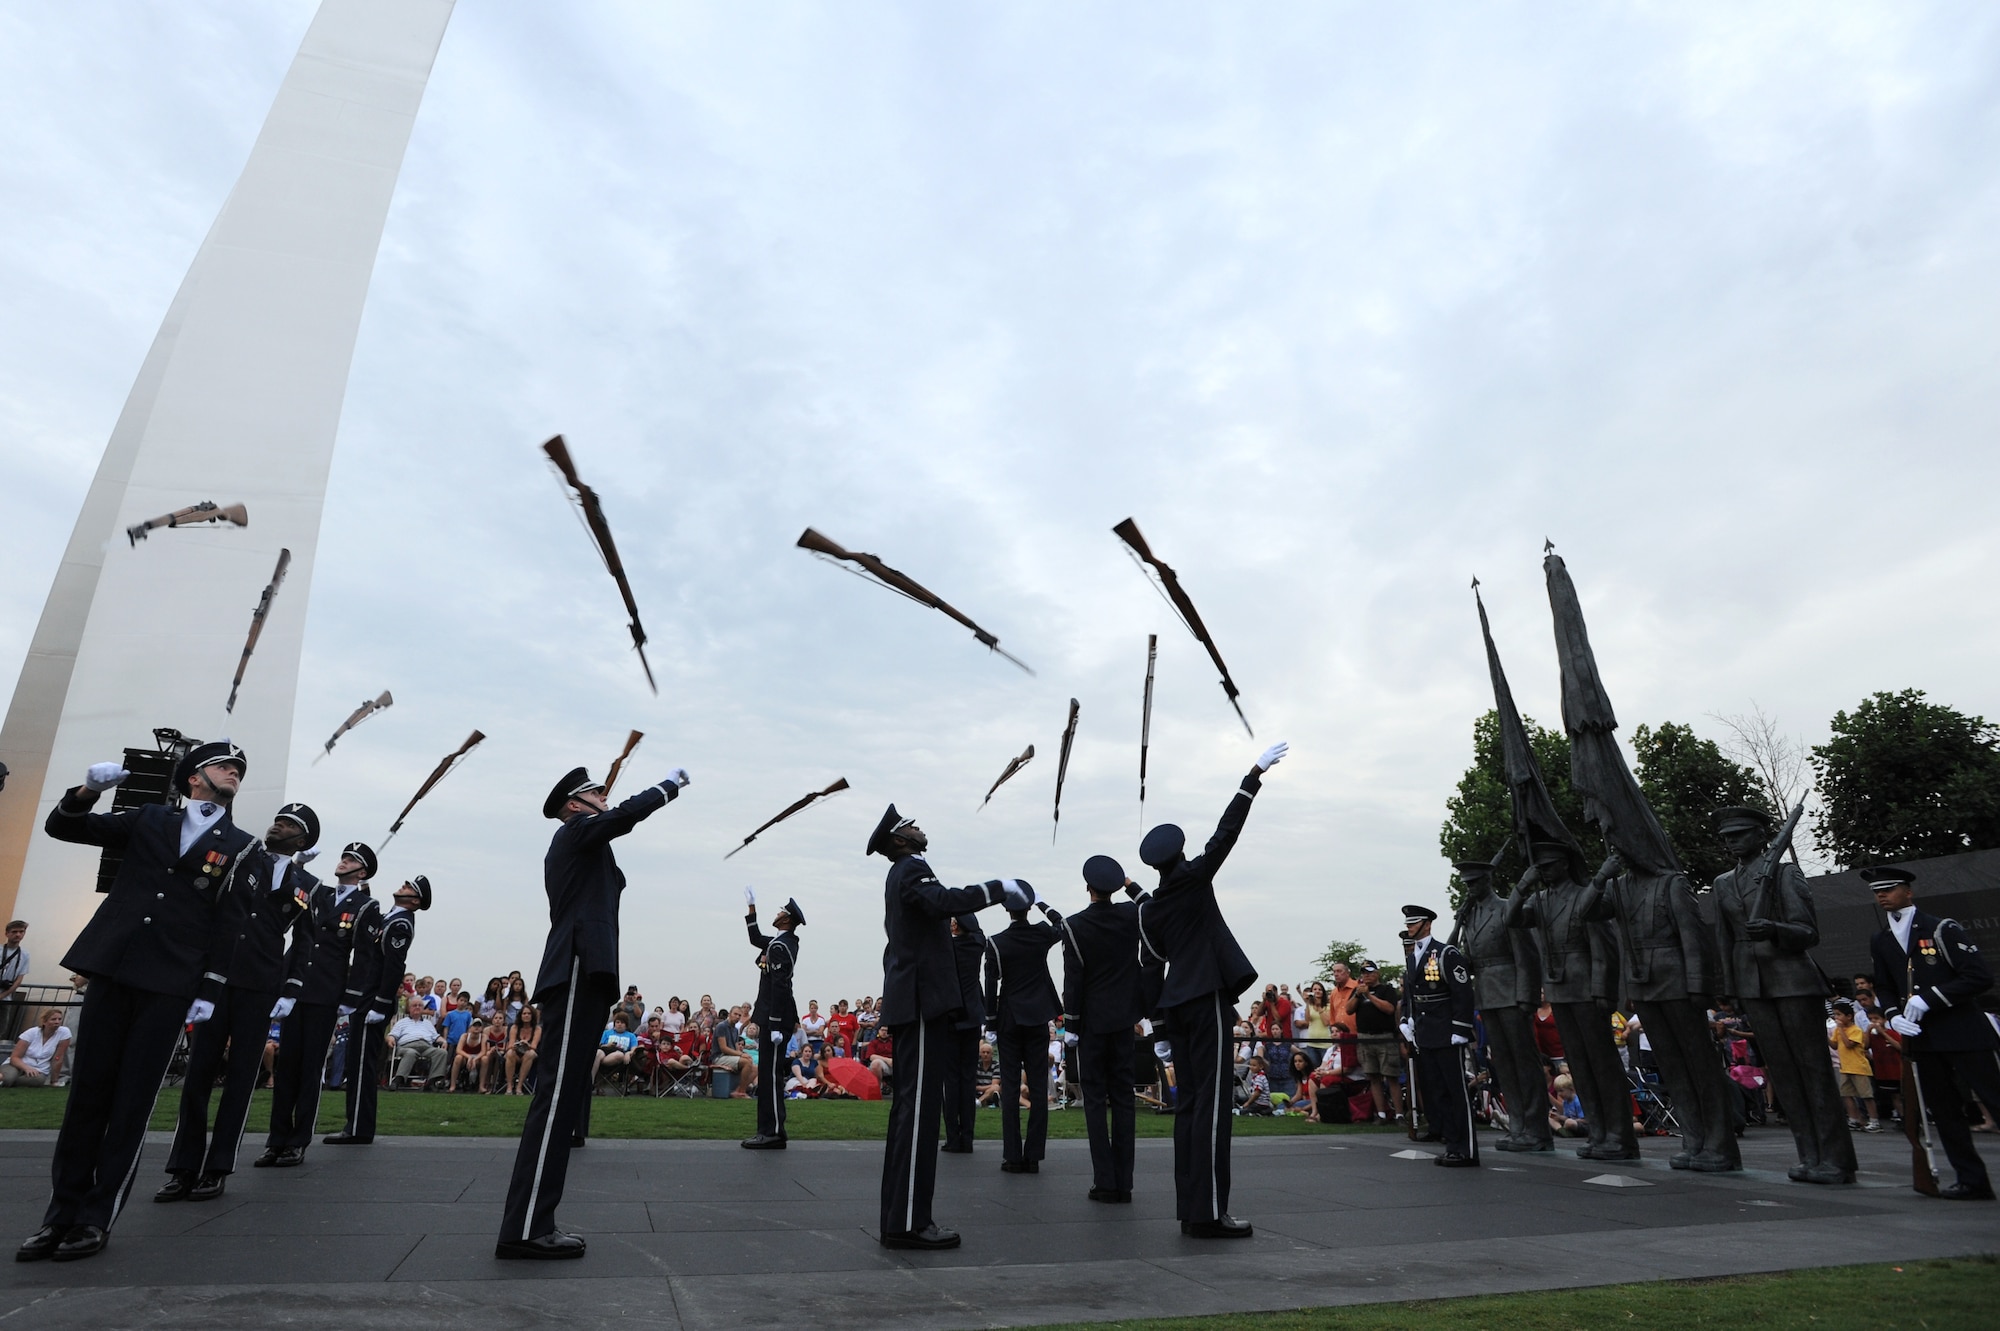 The U.S. Air Force Honor Guard Drill Team honors past and present servicemembers with a performance at the Air Force Memorial on July 4. The USAF Drill Team, followed by the U.S. Air Force Band precluded the Washington D.C. fireworks display. (U.S. Air Force photo by Staff Sgt. Christopher Ruano)